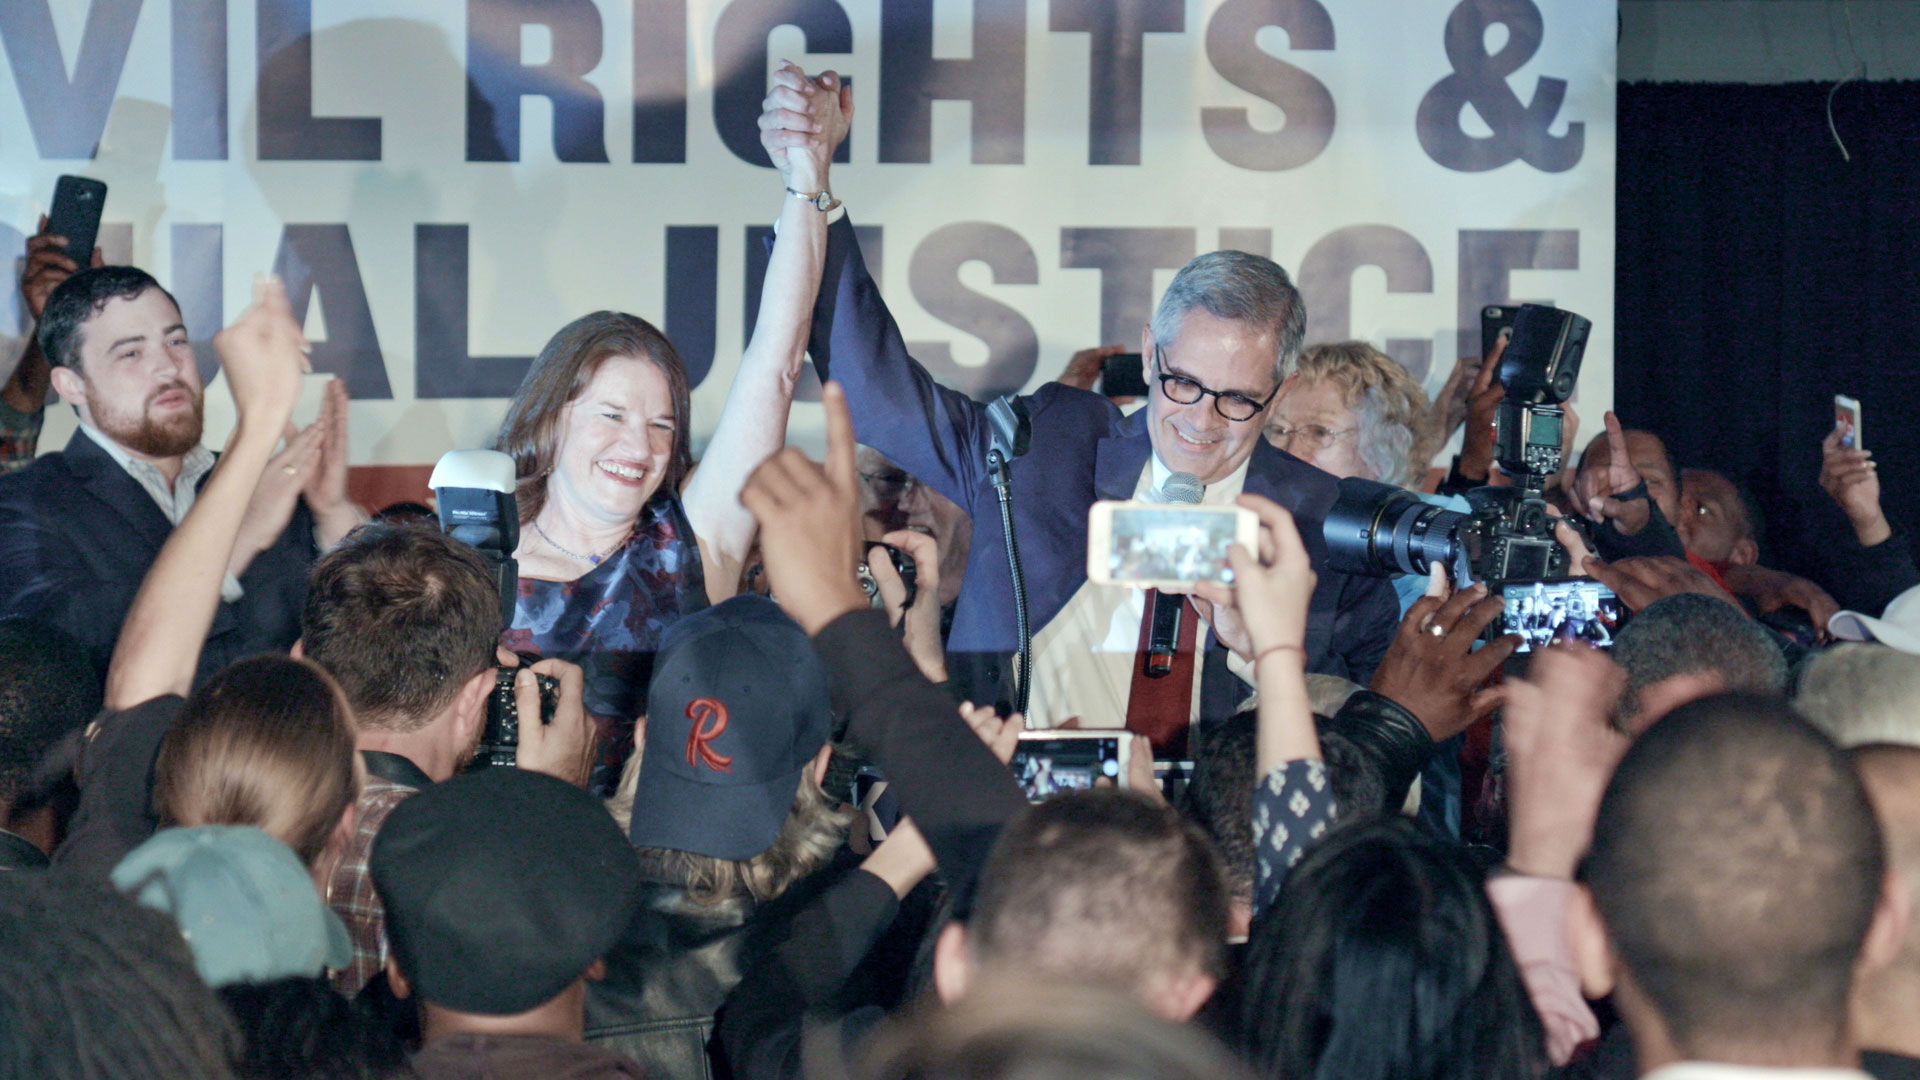 Larry Krasner and his team celebrates their victory on election night in Philadelphia